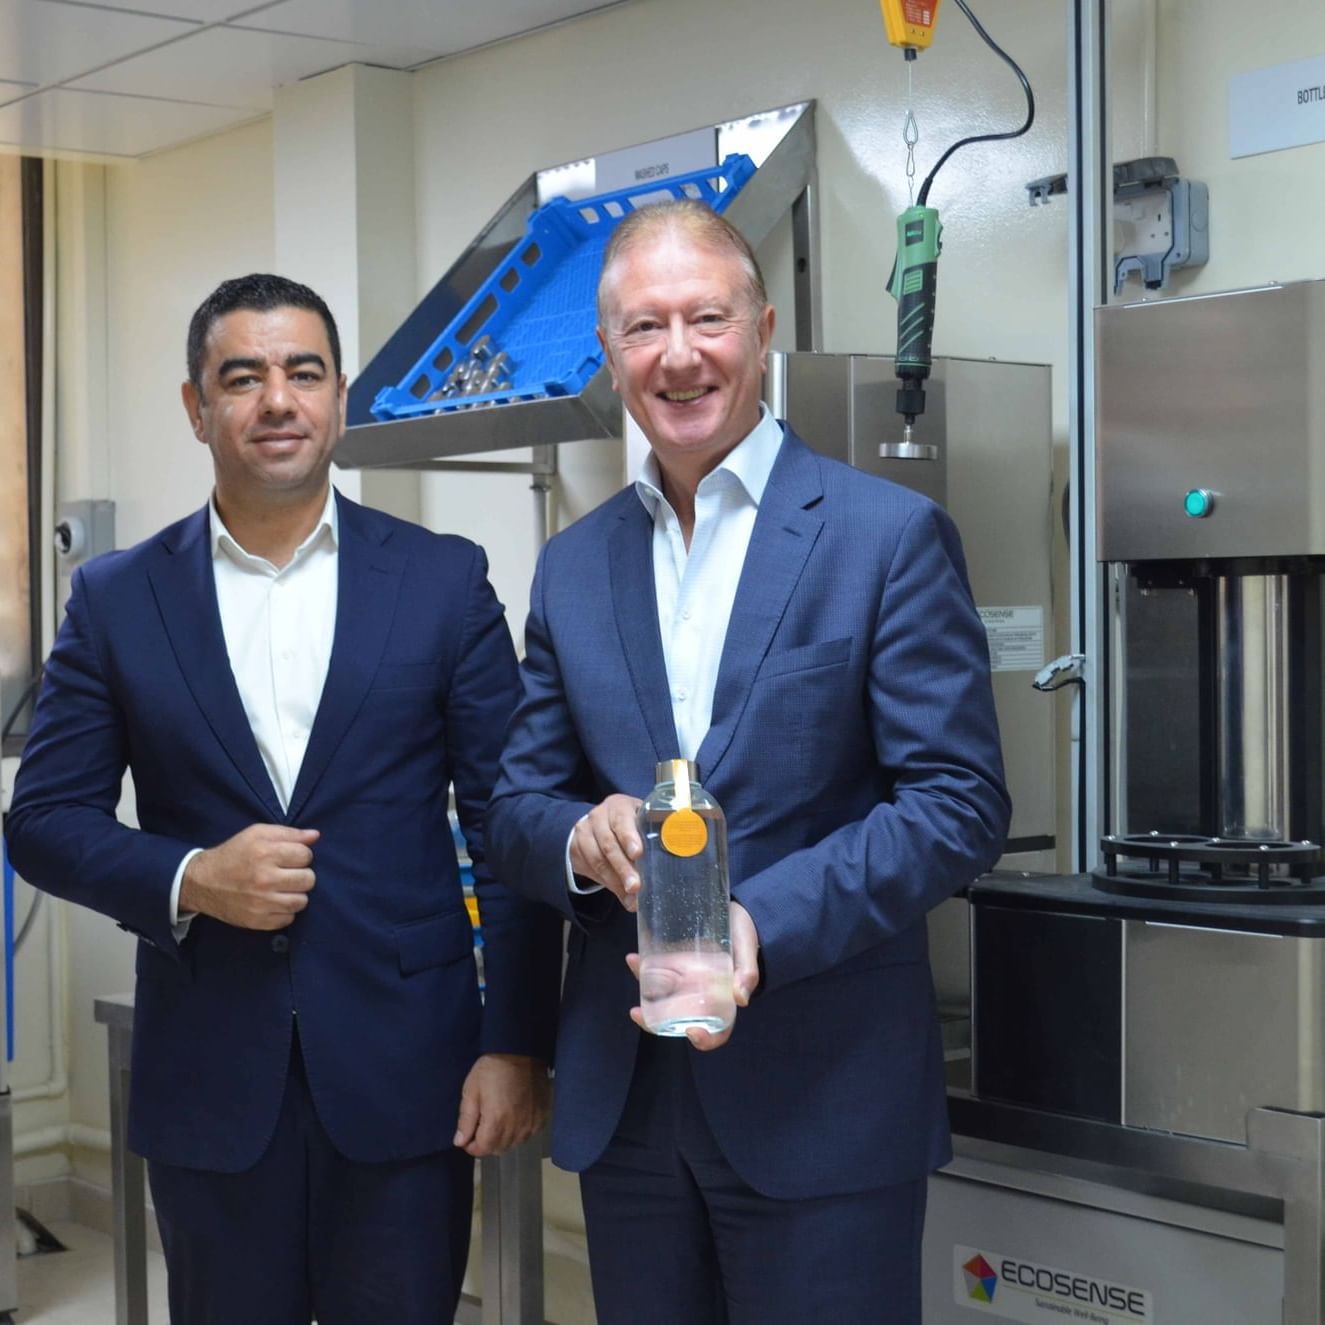 Water Filtration and Bottling System with Mr. Freddy Farid (Managing Director) and Mr. Malek Rummaneh (F&B Manager)